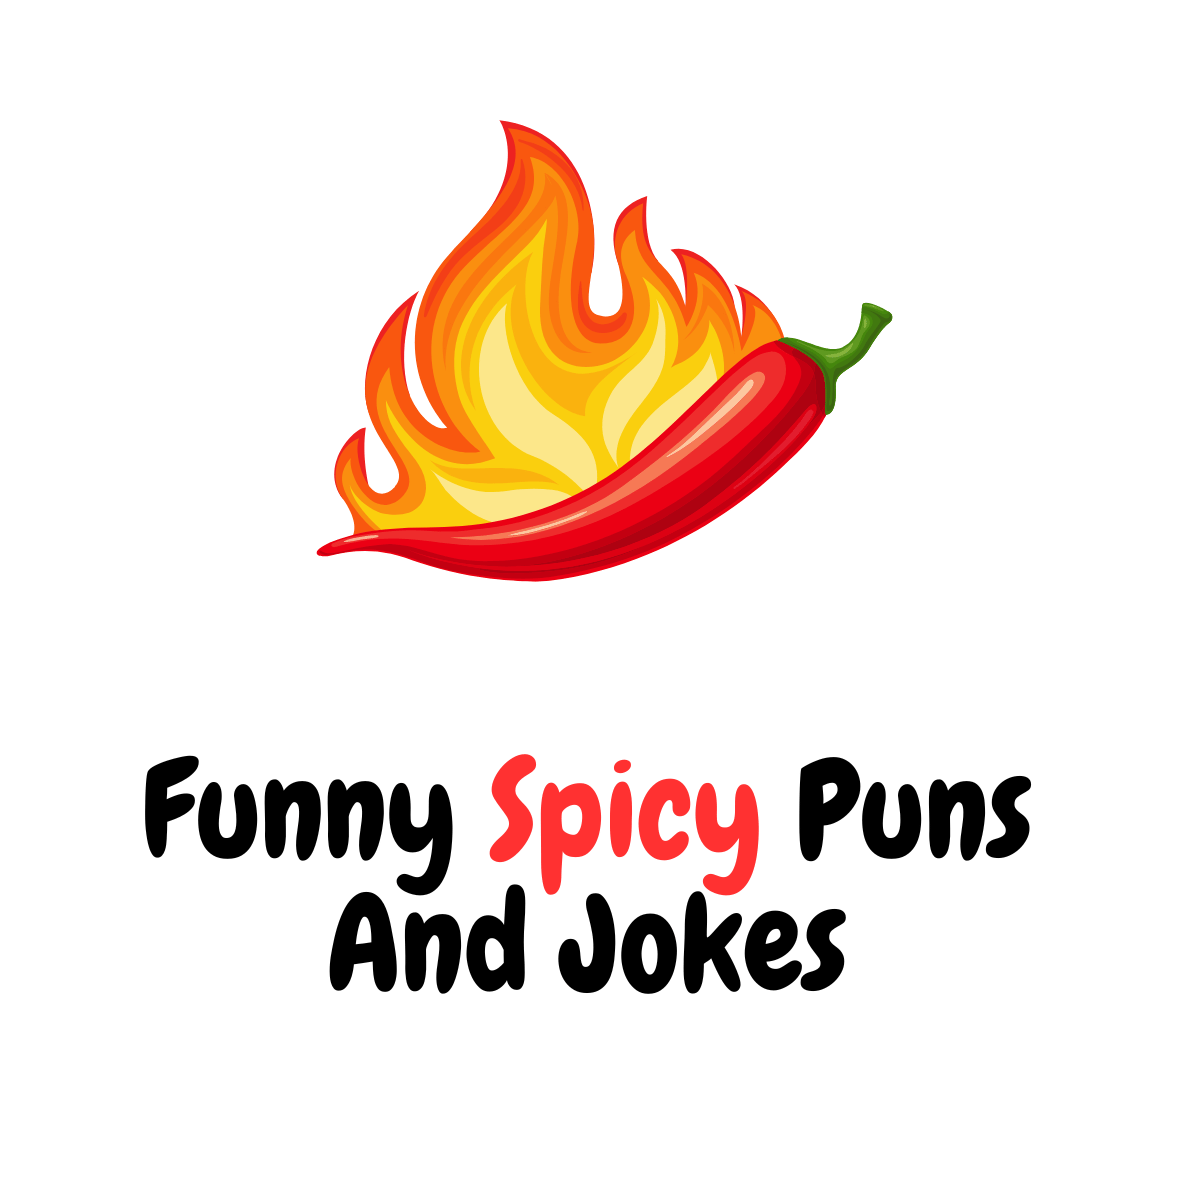 Funny Spicy Puns And Jokes